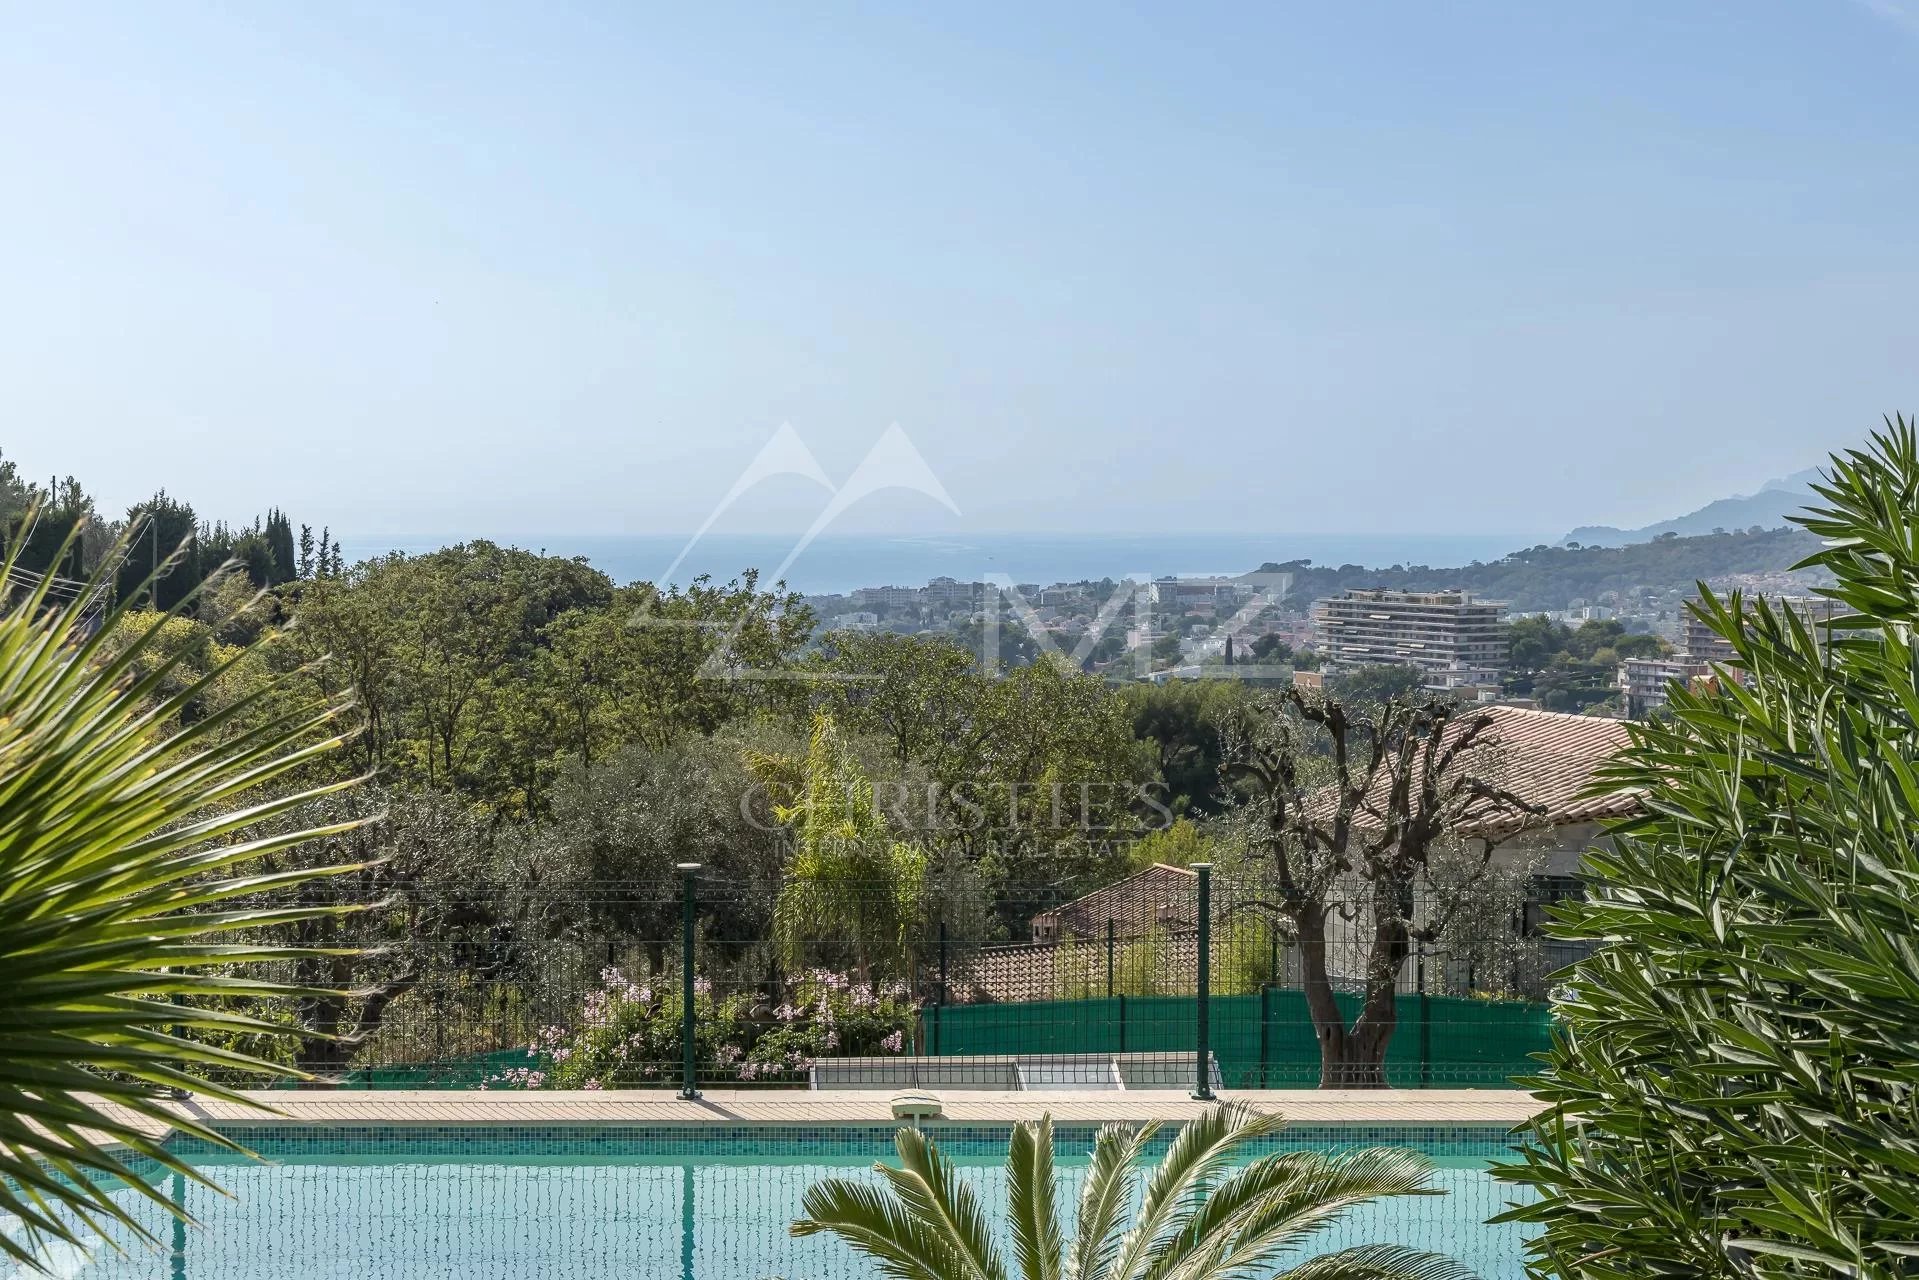 Residential area close to Cannes, very nice view of the sea and hills